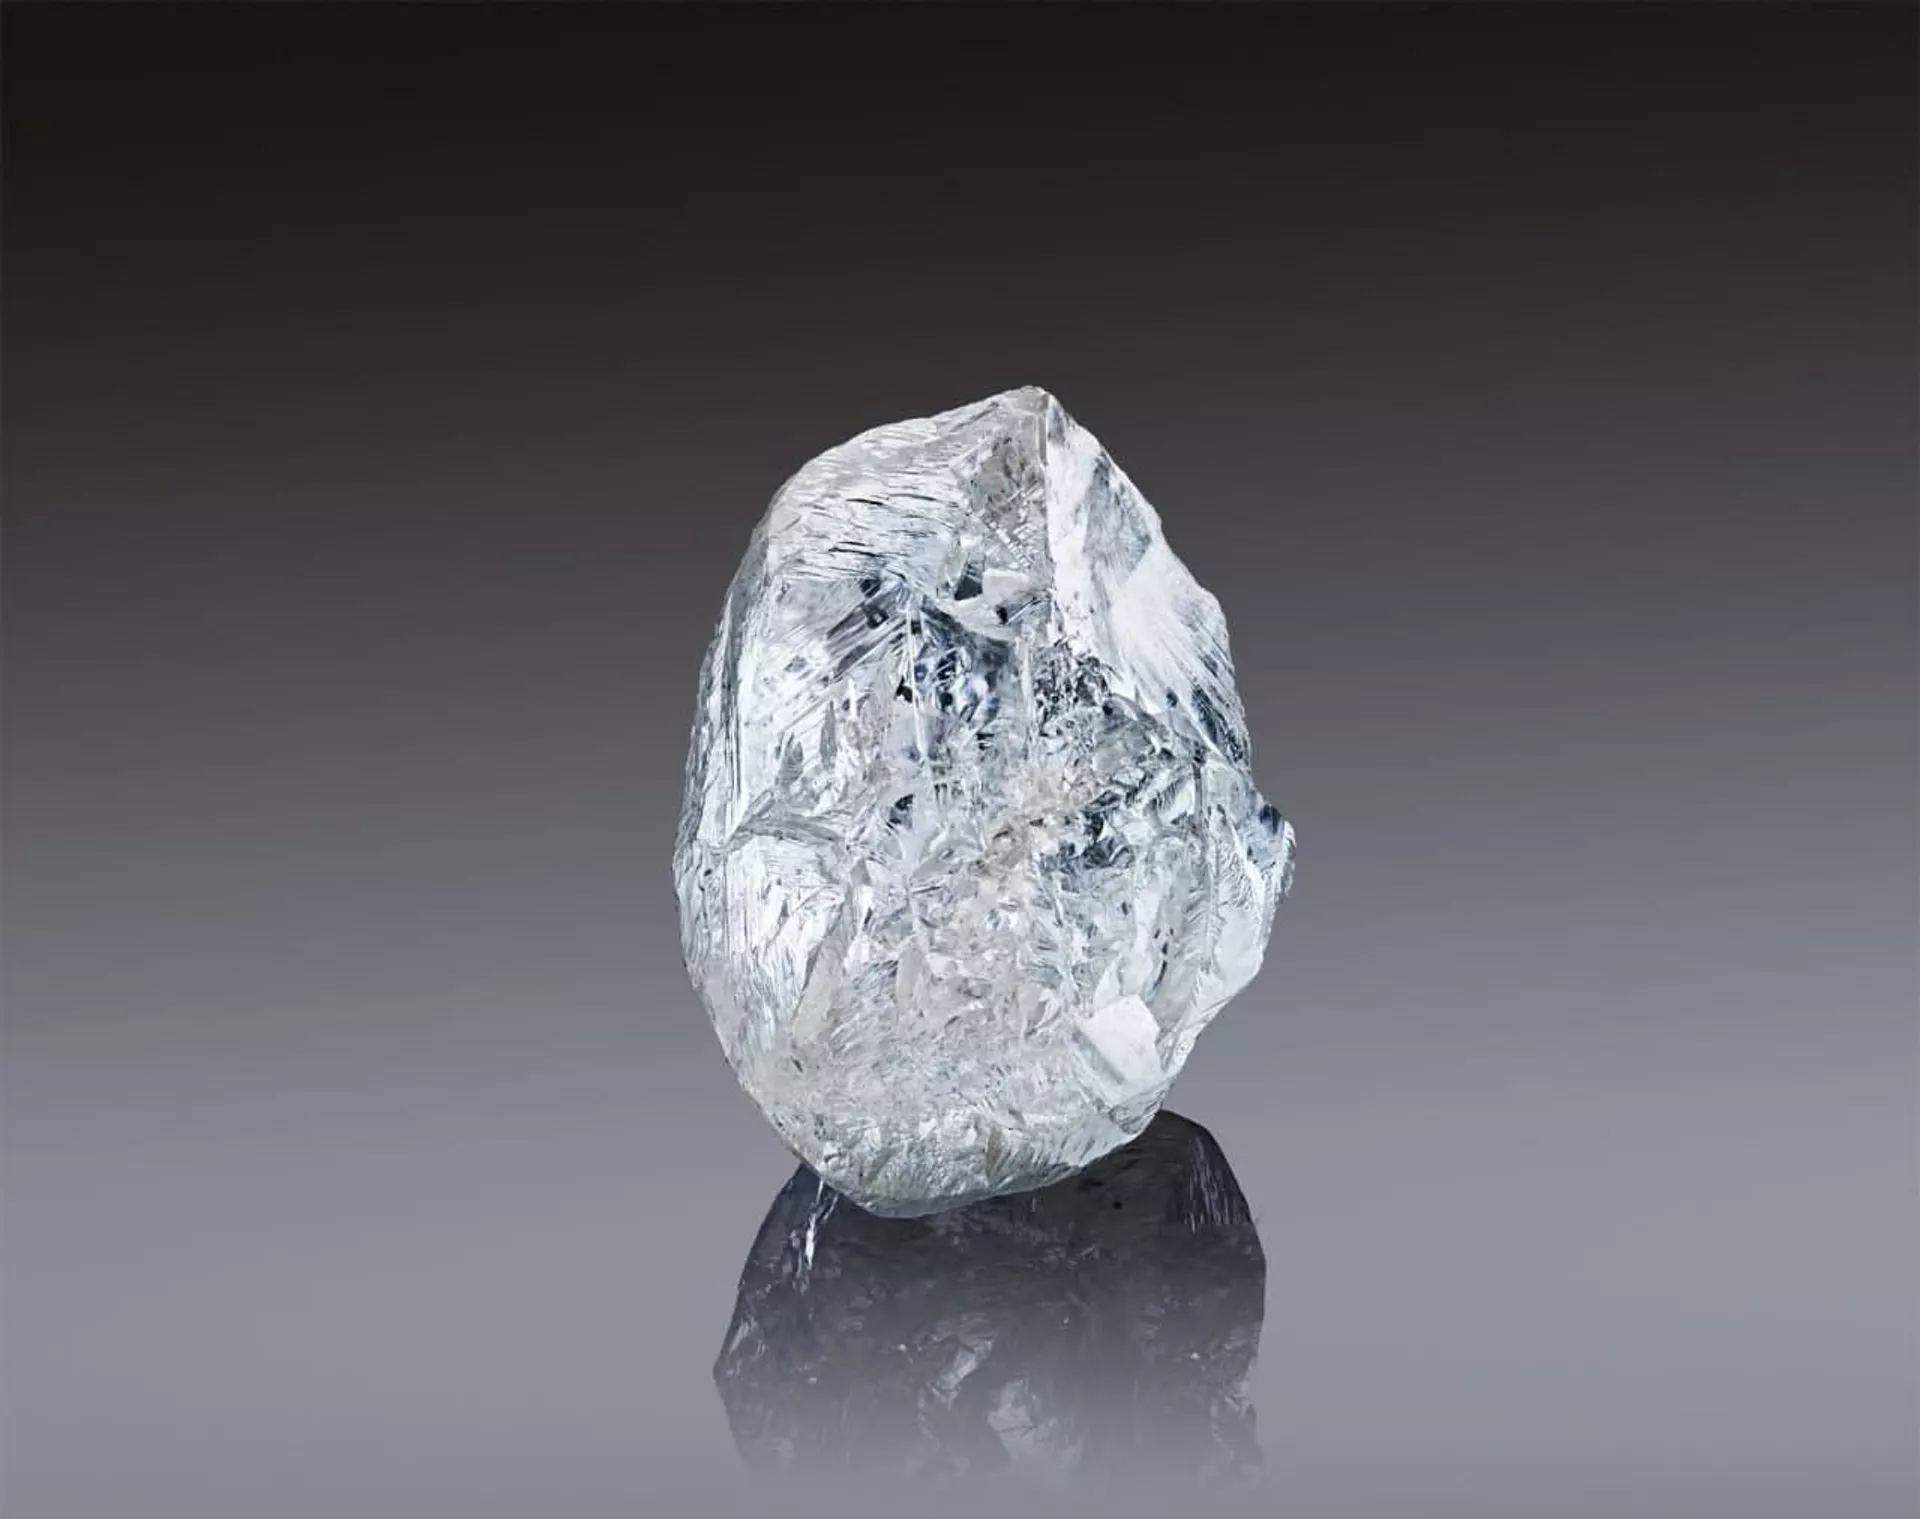 In this handout photo released by the Russian diamond producer Alrosa, a view shows a rare 242-carat rough diamond, which will be offered at the 100th international auction of Alrosa in Dubai on March 22, 2021